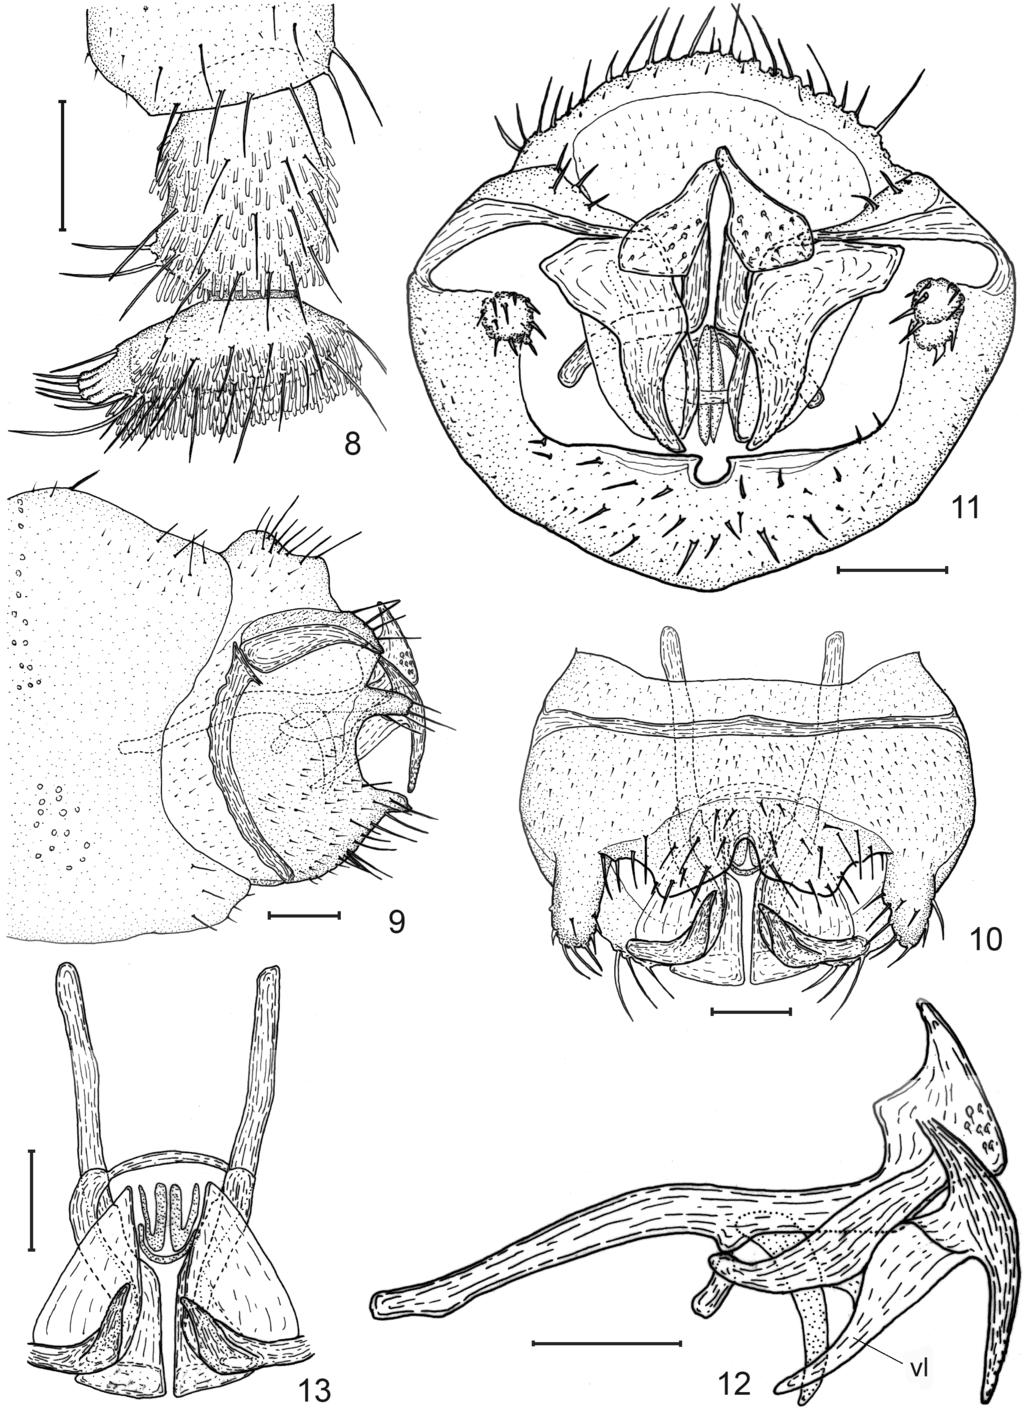 NEW CONIOPTERYGIDAE SPECIES (NEUROPTERA) FROM MADAGASCAR 141 Figs 8 13. Coniopteryx (C.) evellana sp. n.